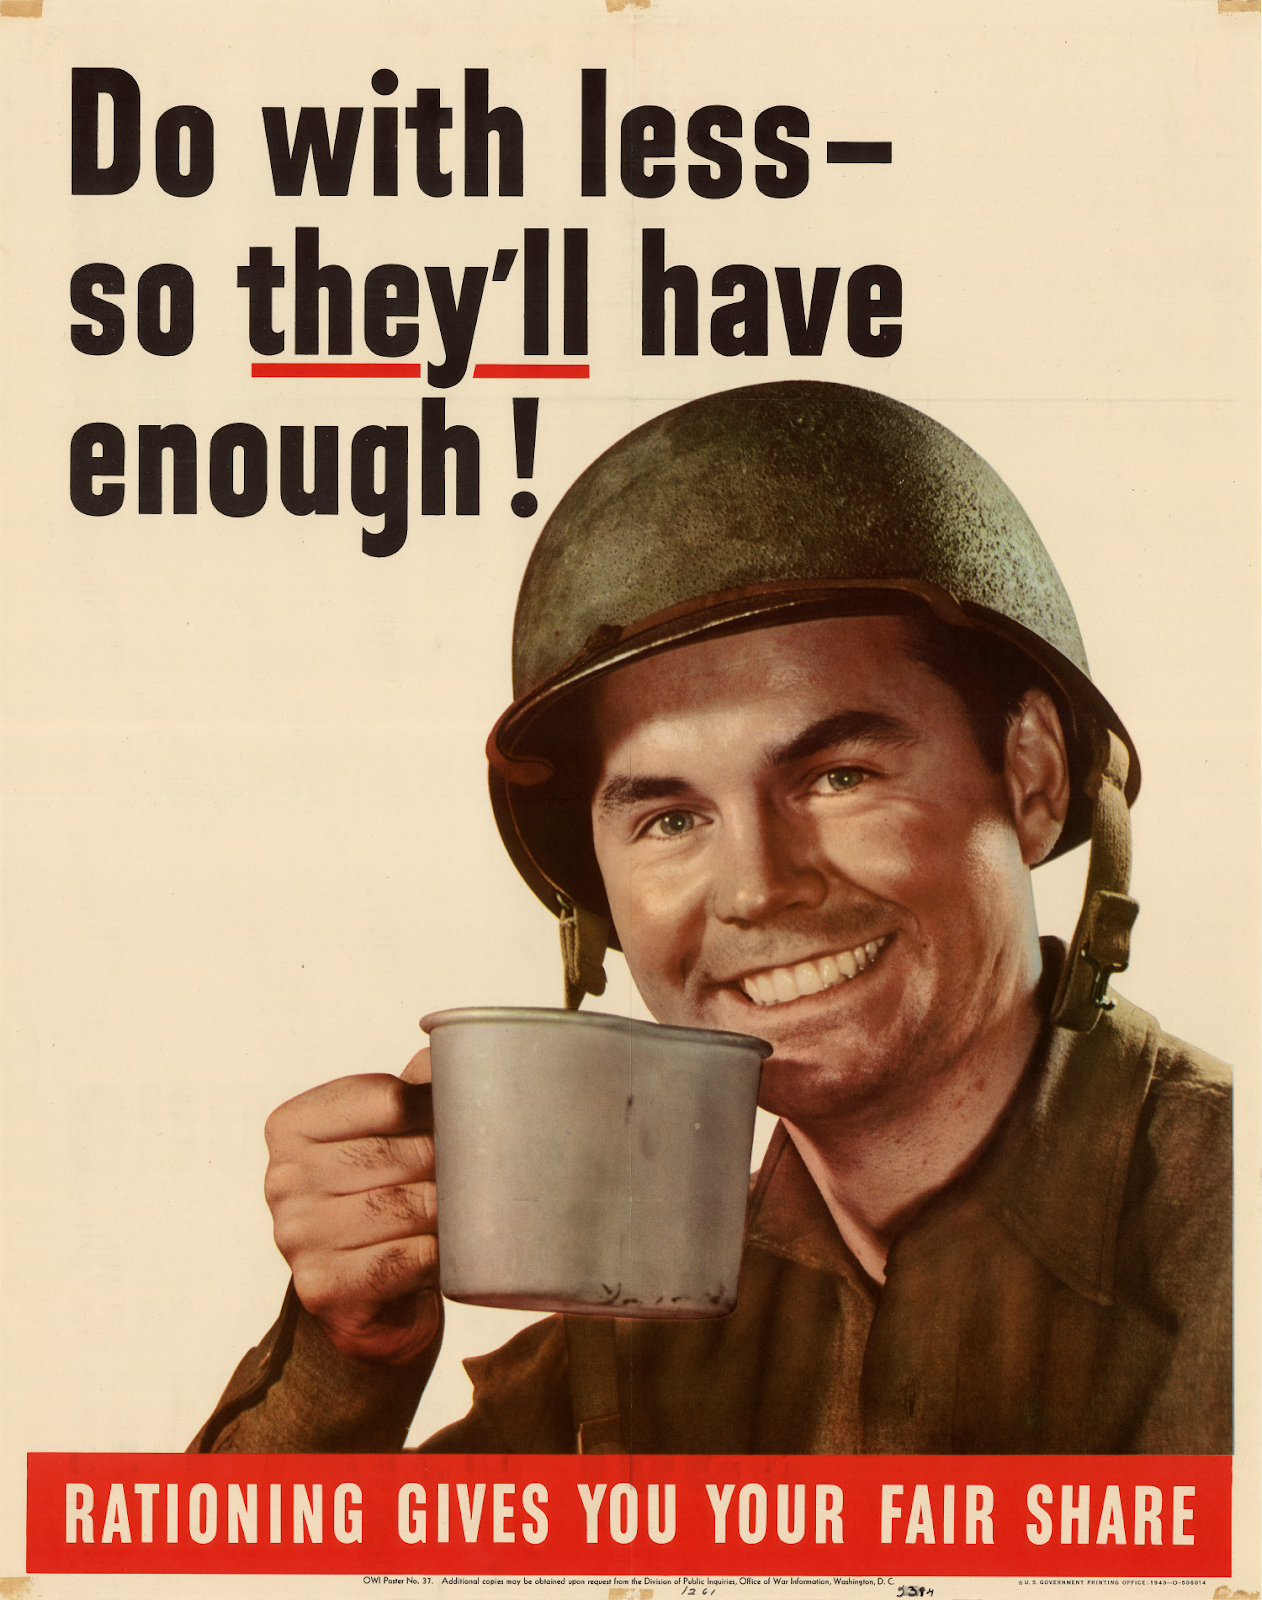 A World War two poster that says "Do with less so they'll have enough!" And "Rationing gives you your fair share.<br /> Image of e soldier smiling and holding a coffee cup.